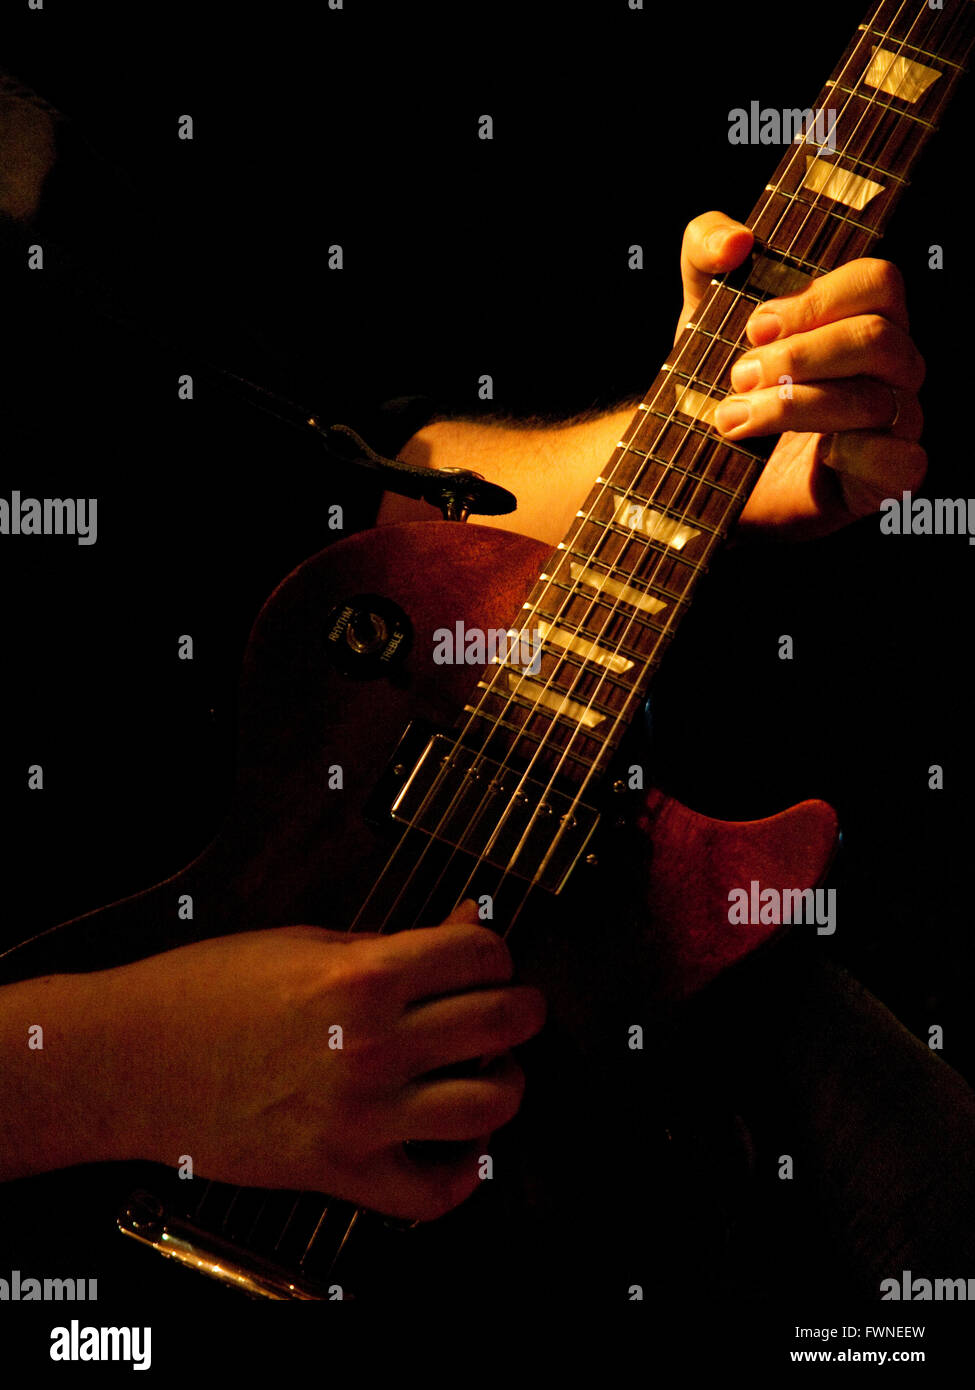 Guitar player hands on fretboard Stock Photo